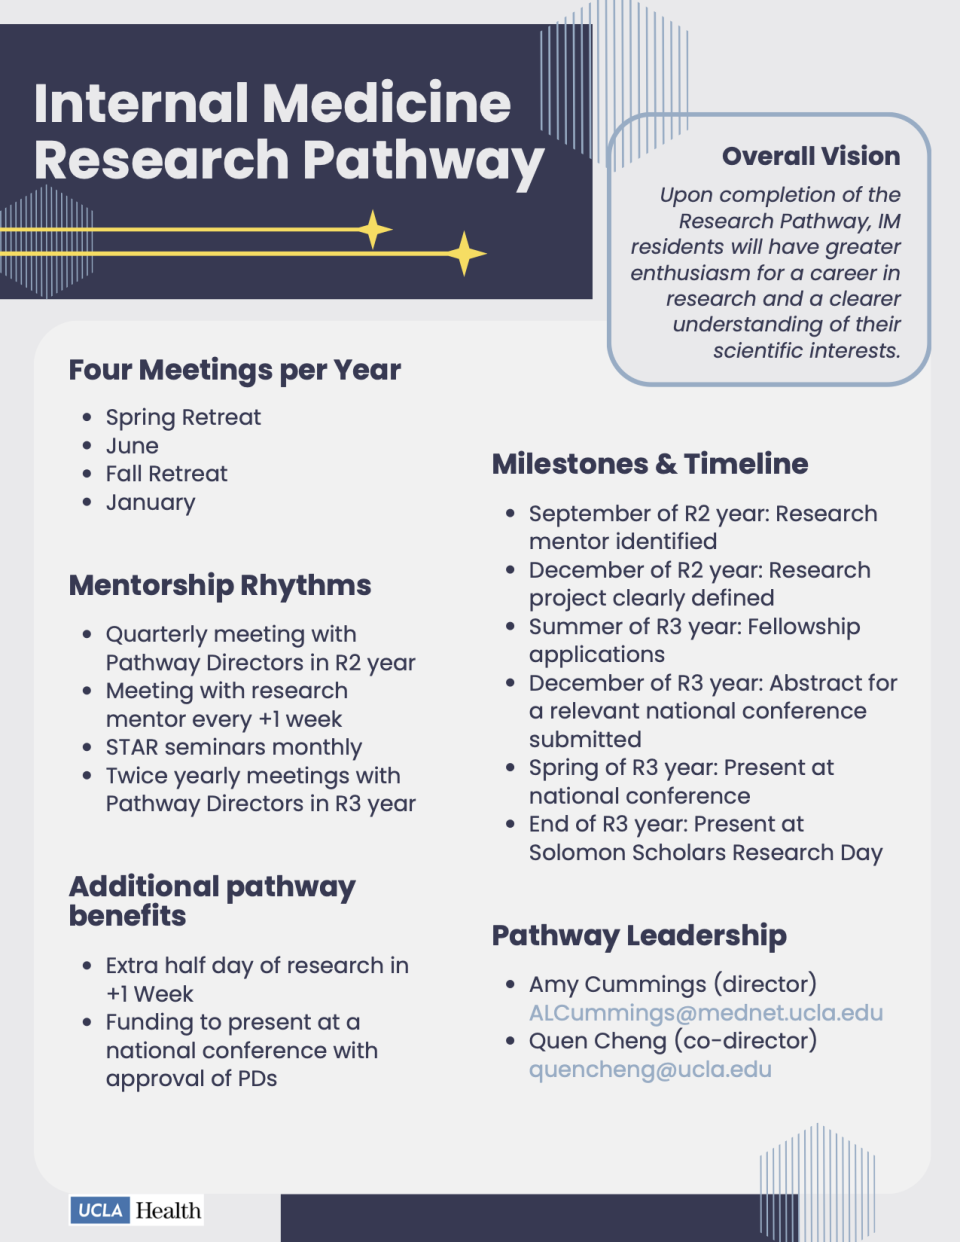 IM Research Pathway